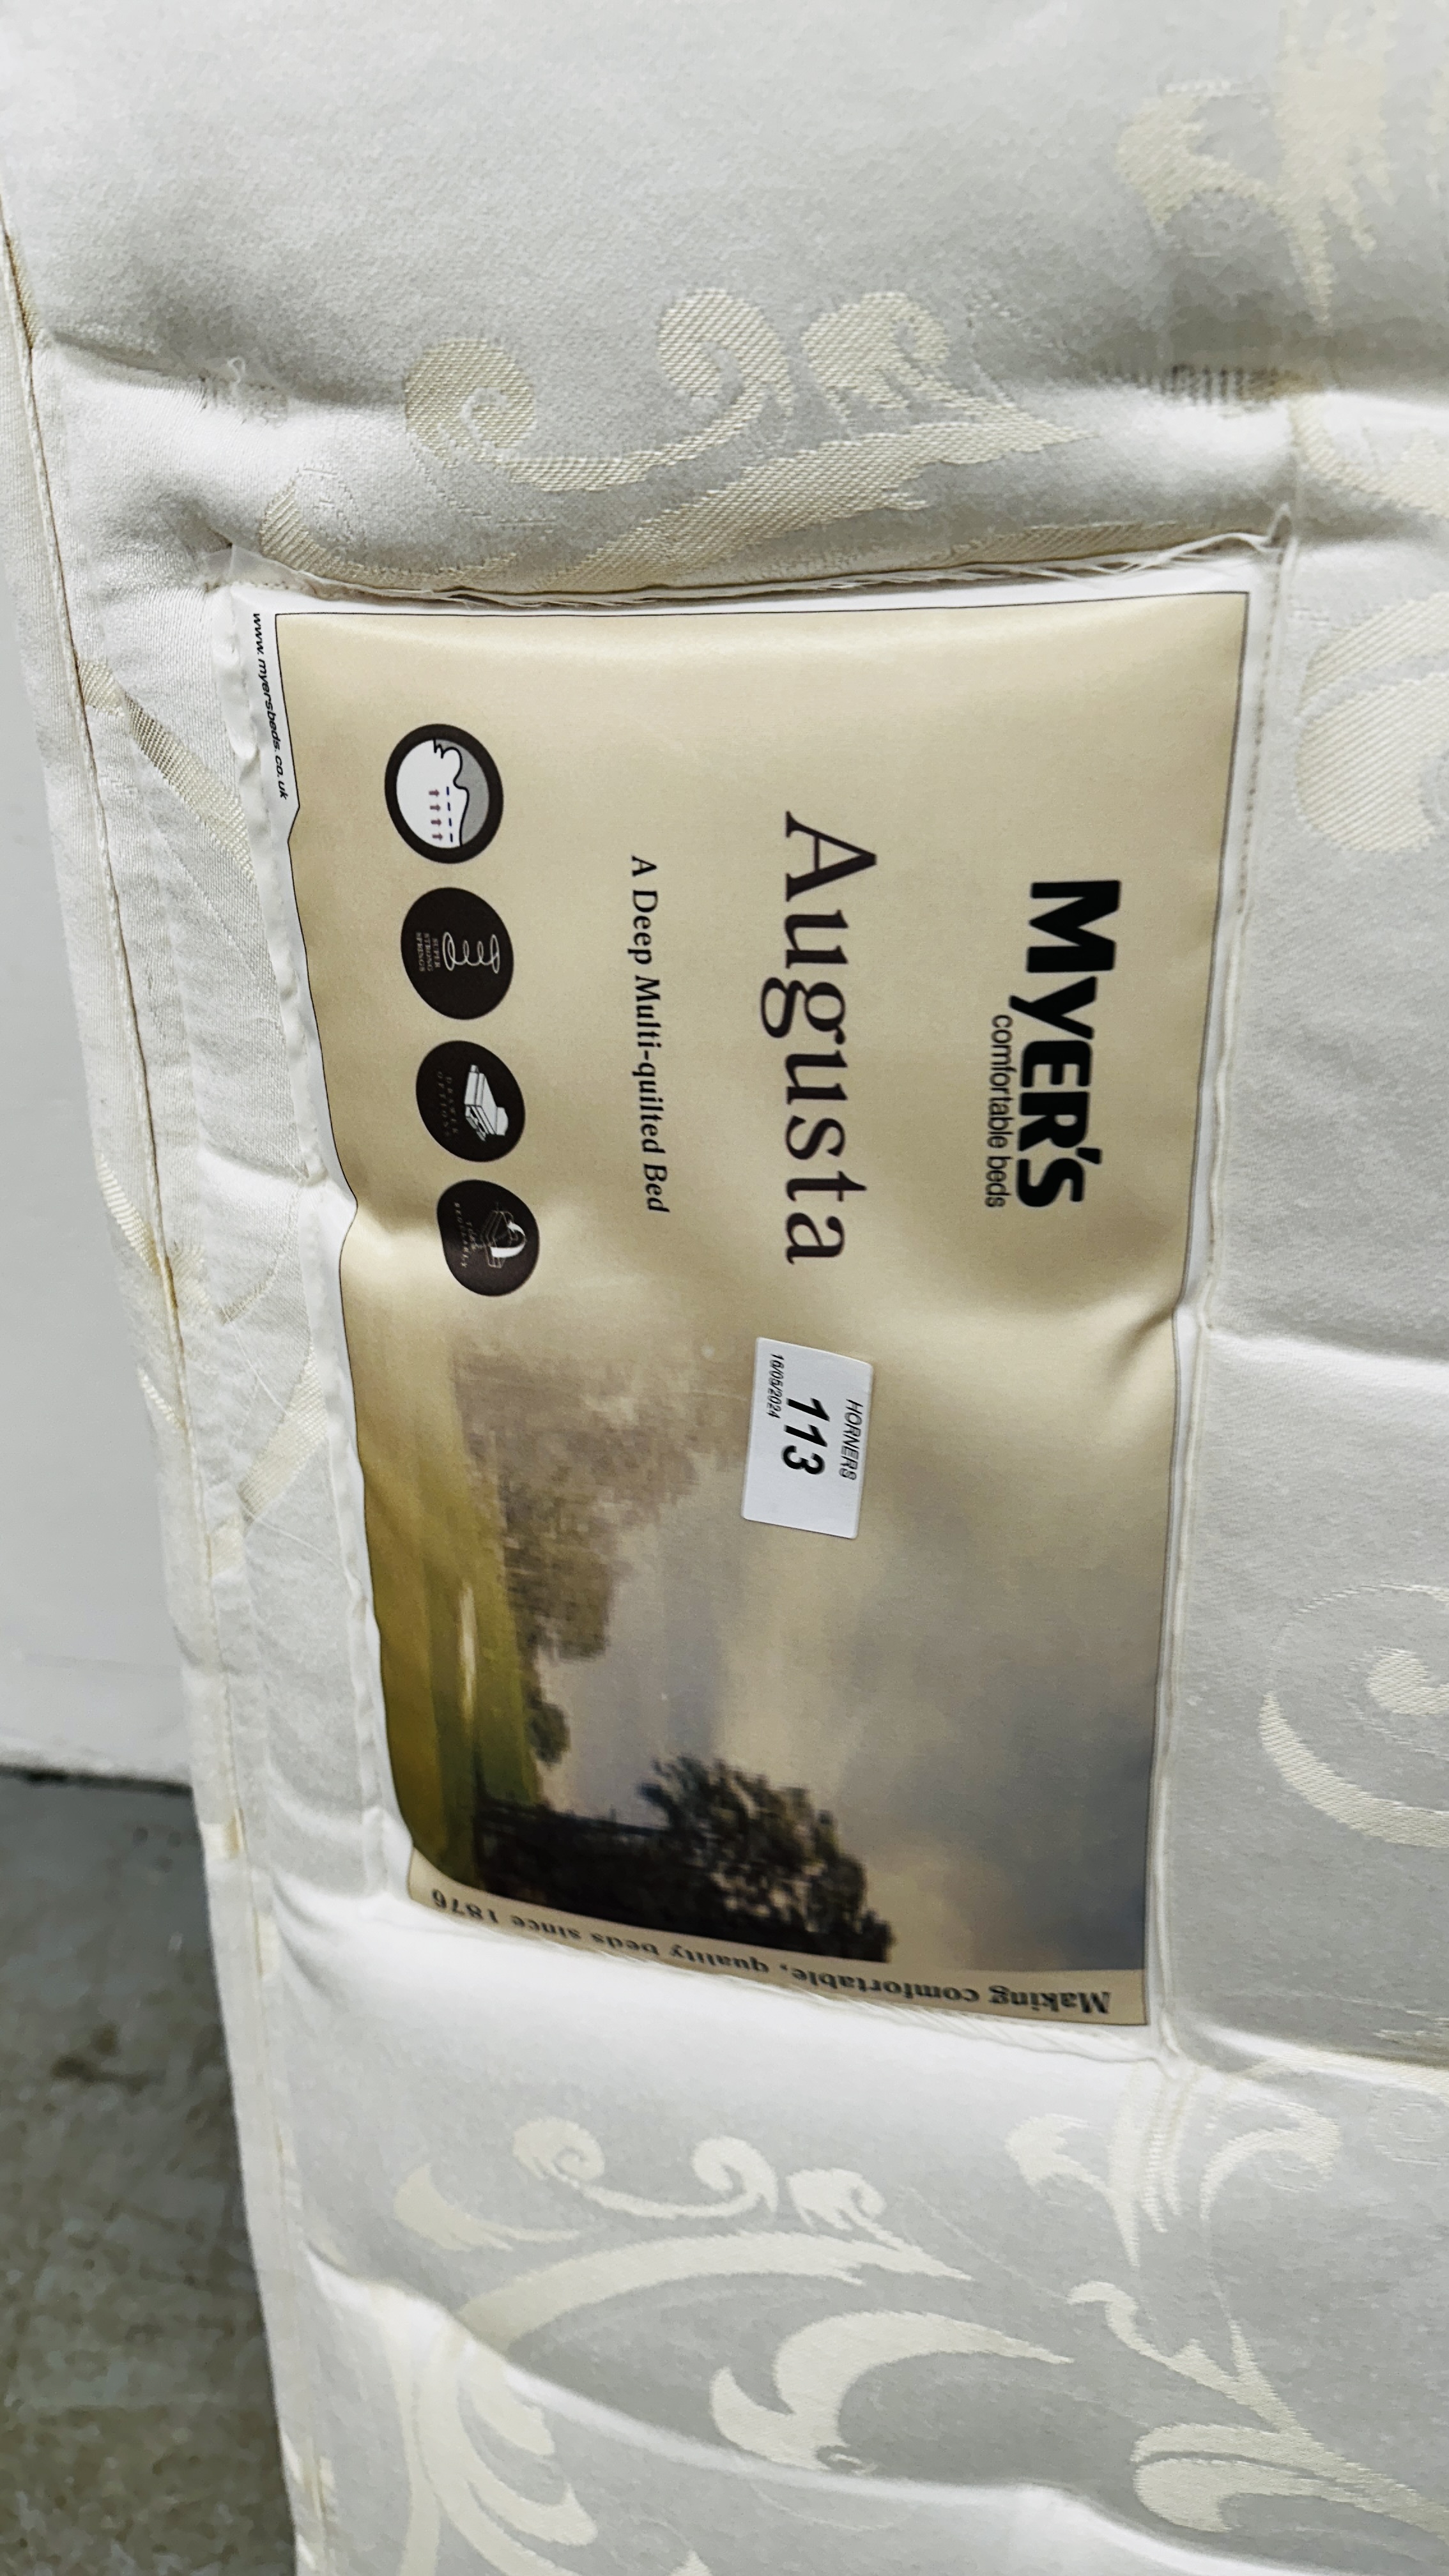 MYERS "AUGUSTA" DEEP QUILTED DOUBLE MATTRESS. - Image 9 of 10